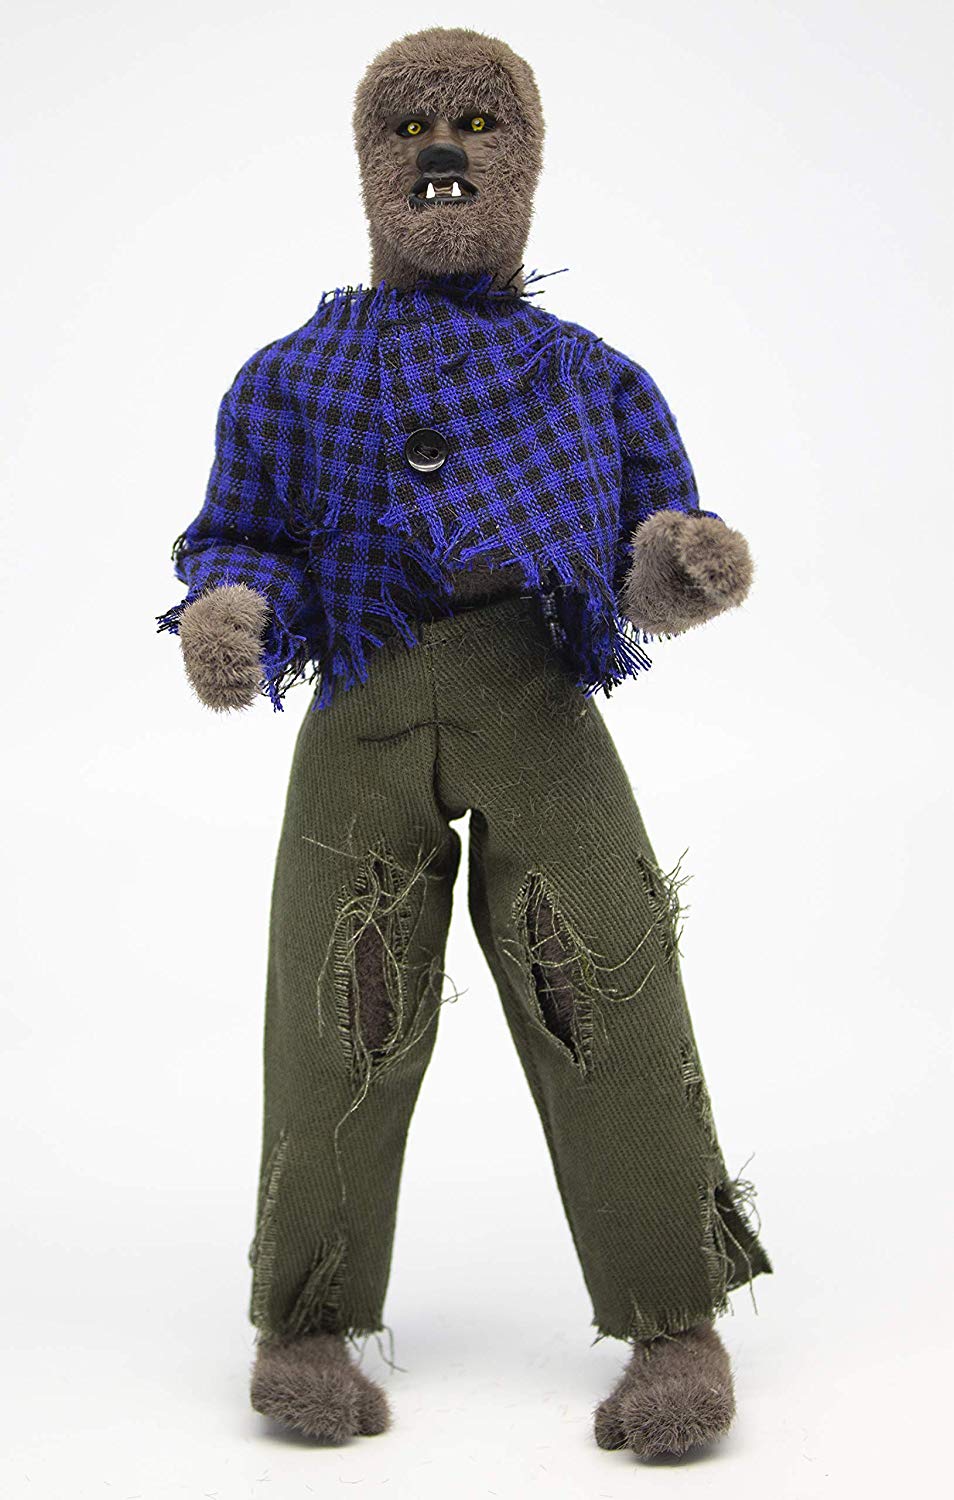 Damaged Package Mego Horror Wave 6 - Face Of The Screaming Werewolf 8" Action Figure (Full Body Flock and New Outfit) - Zlc Collectibles